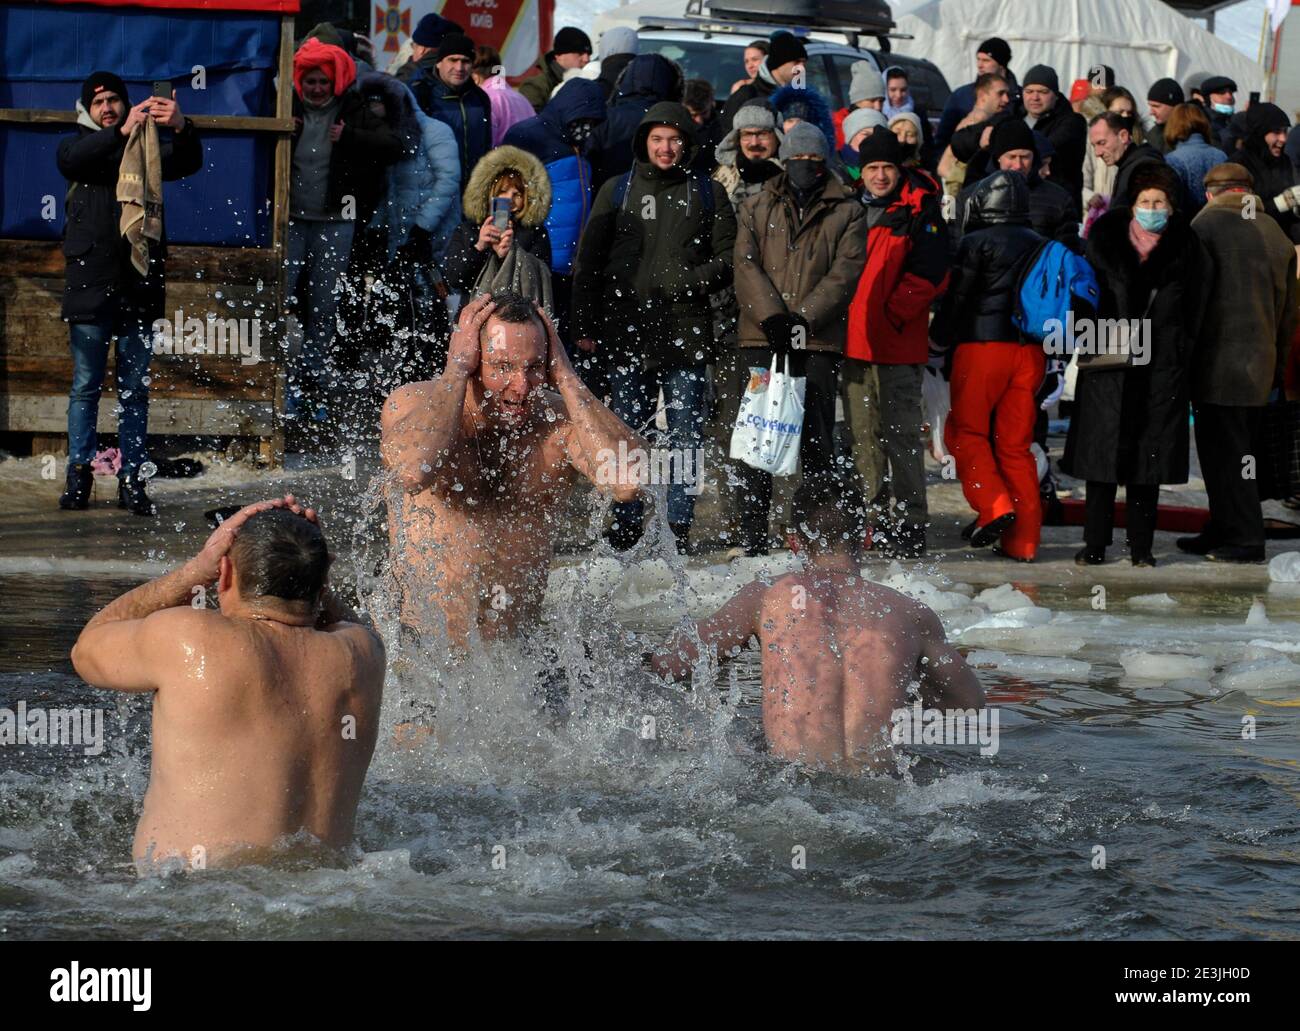 People seen plunging into icy water of the Dnieper river during the Orthodox Epiphany next to St. Pokrov's church.Epiphany, also known as Theophany in the east, is a Christian feast day that celebrates the revelation of God incarnate as Jesus Christ. In Western Christianity, the feast commemorates principally the visit of the Magi to the Christ Child, and thus Jesus' physical manifestation to the Gentiles. Stock Photo